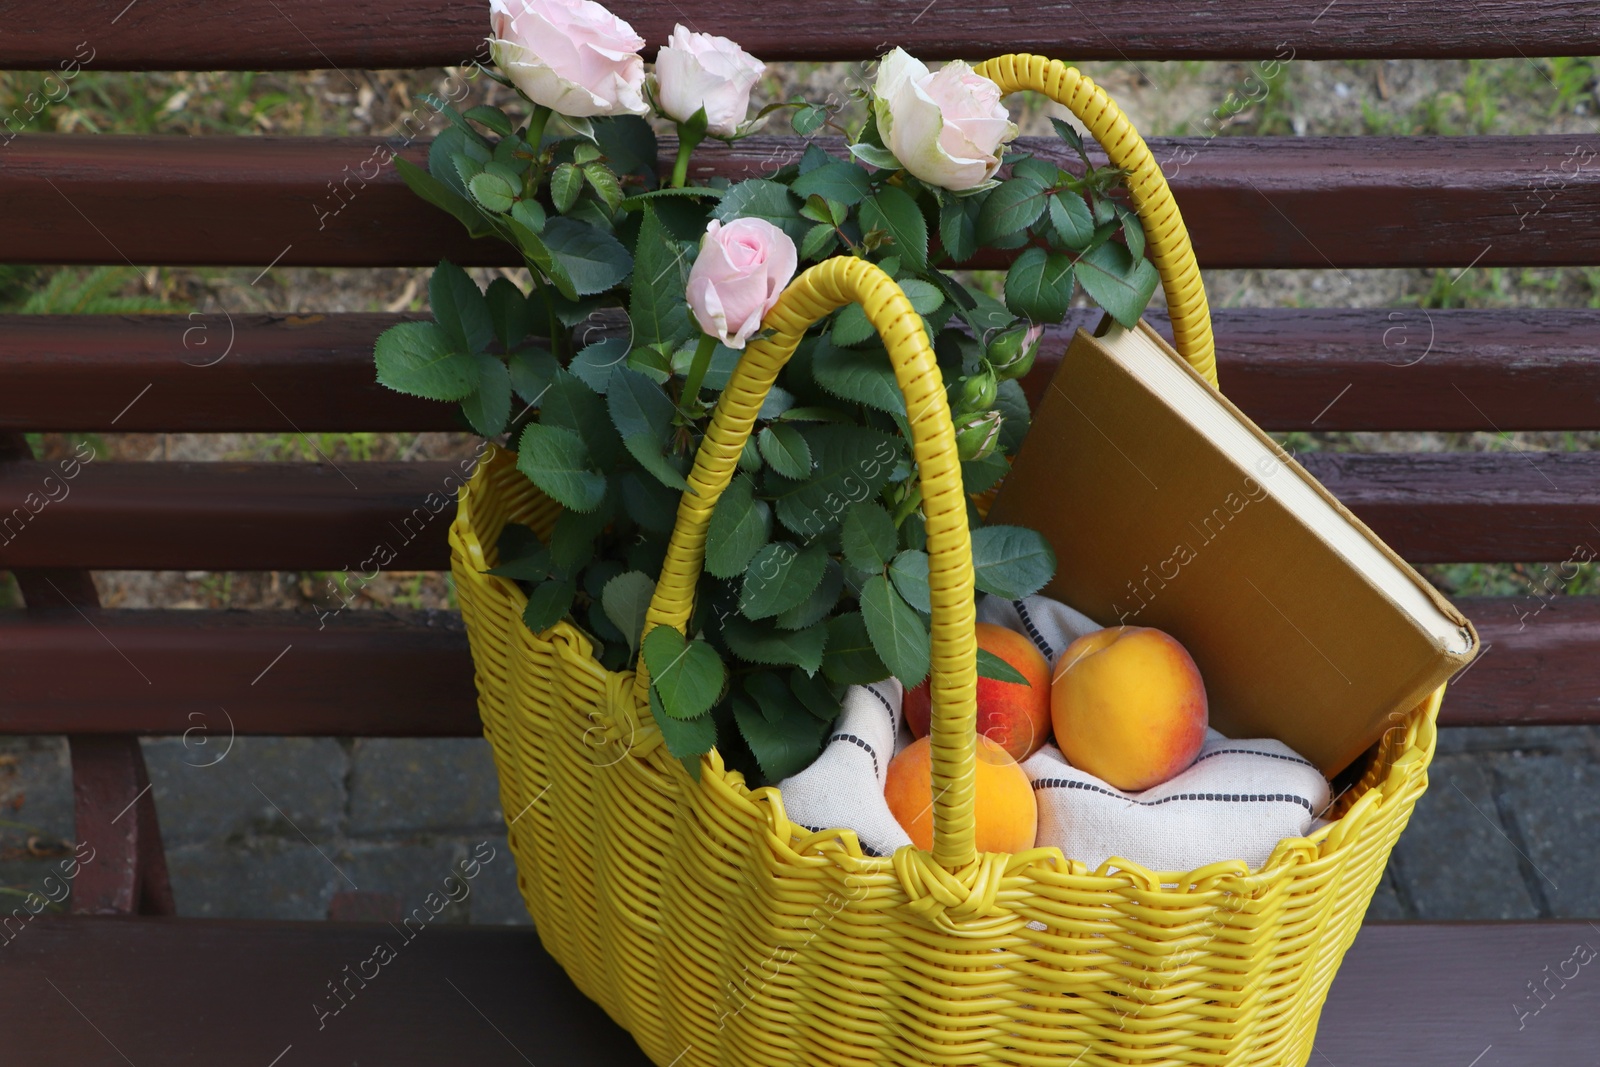 Photo of Yellow wicker bag with roses, book and peaches on bench outdoors